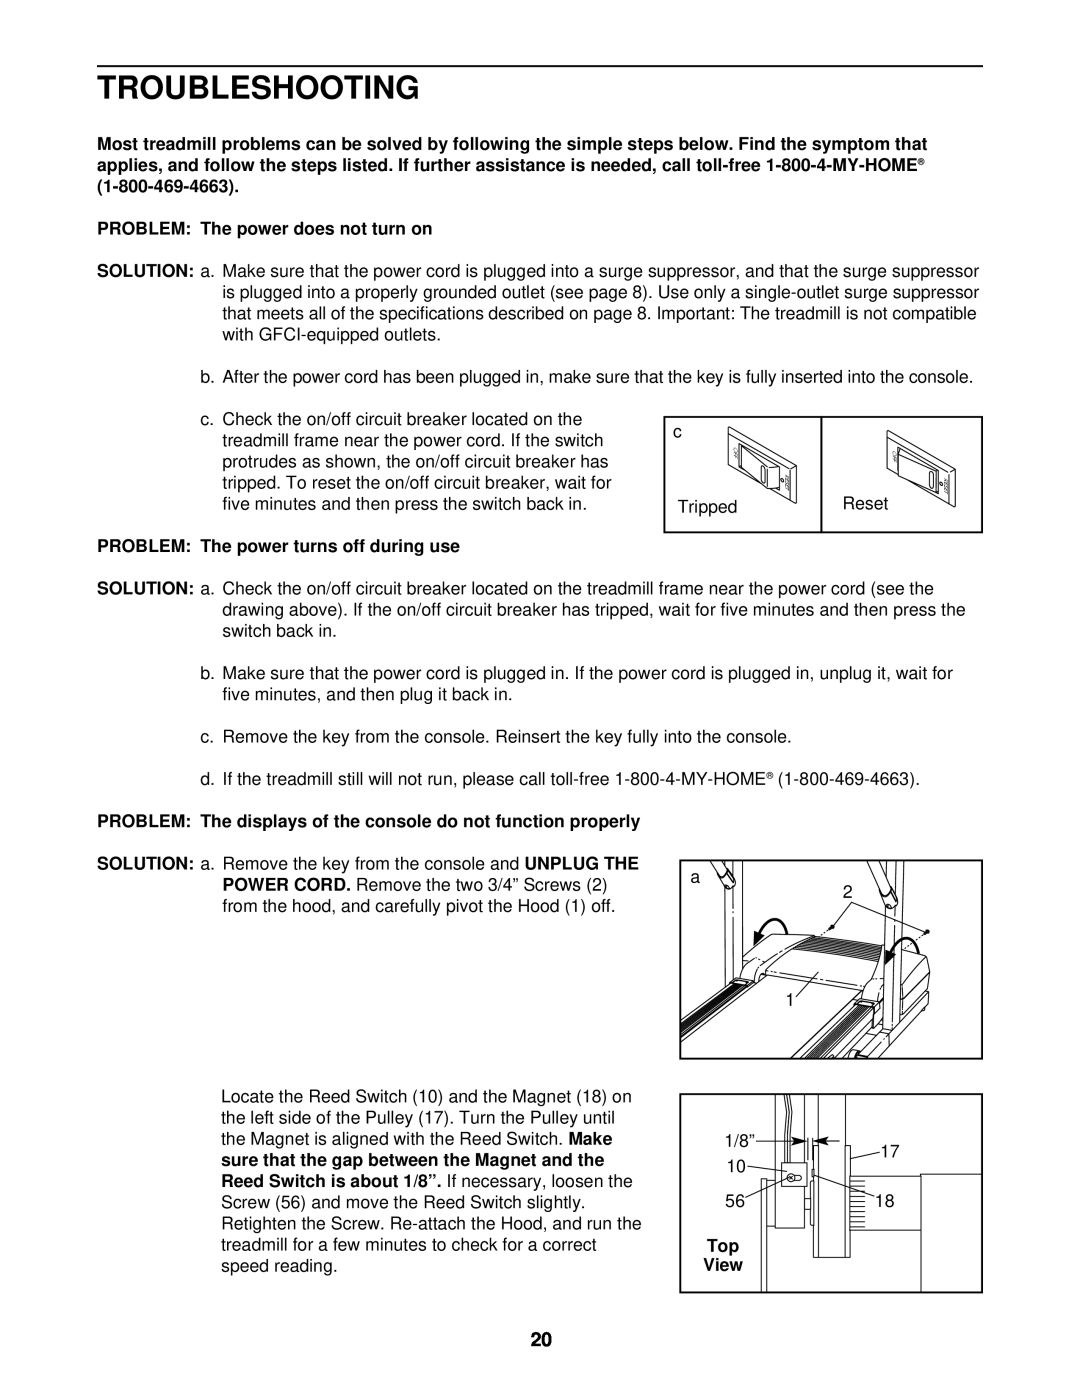 ProForm 831.293040 user manual Troubleshooting, PROBLEM The power does not turn on, PROBLEM The power turns off during use 